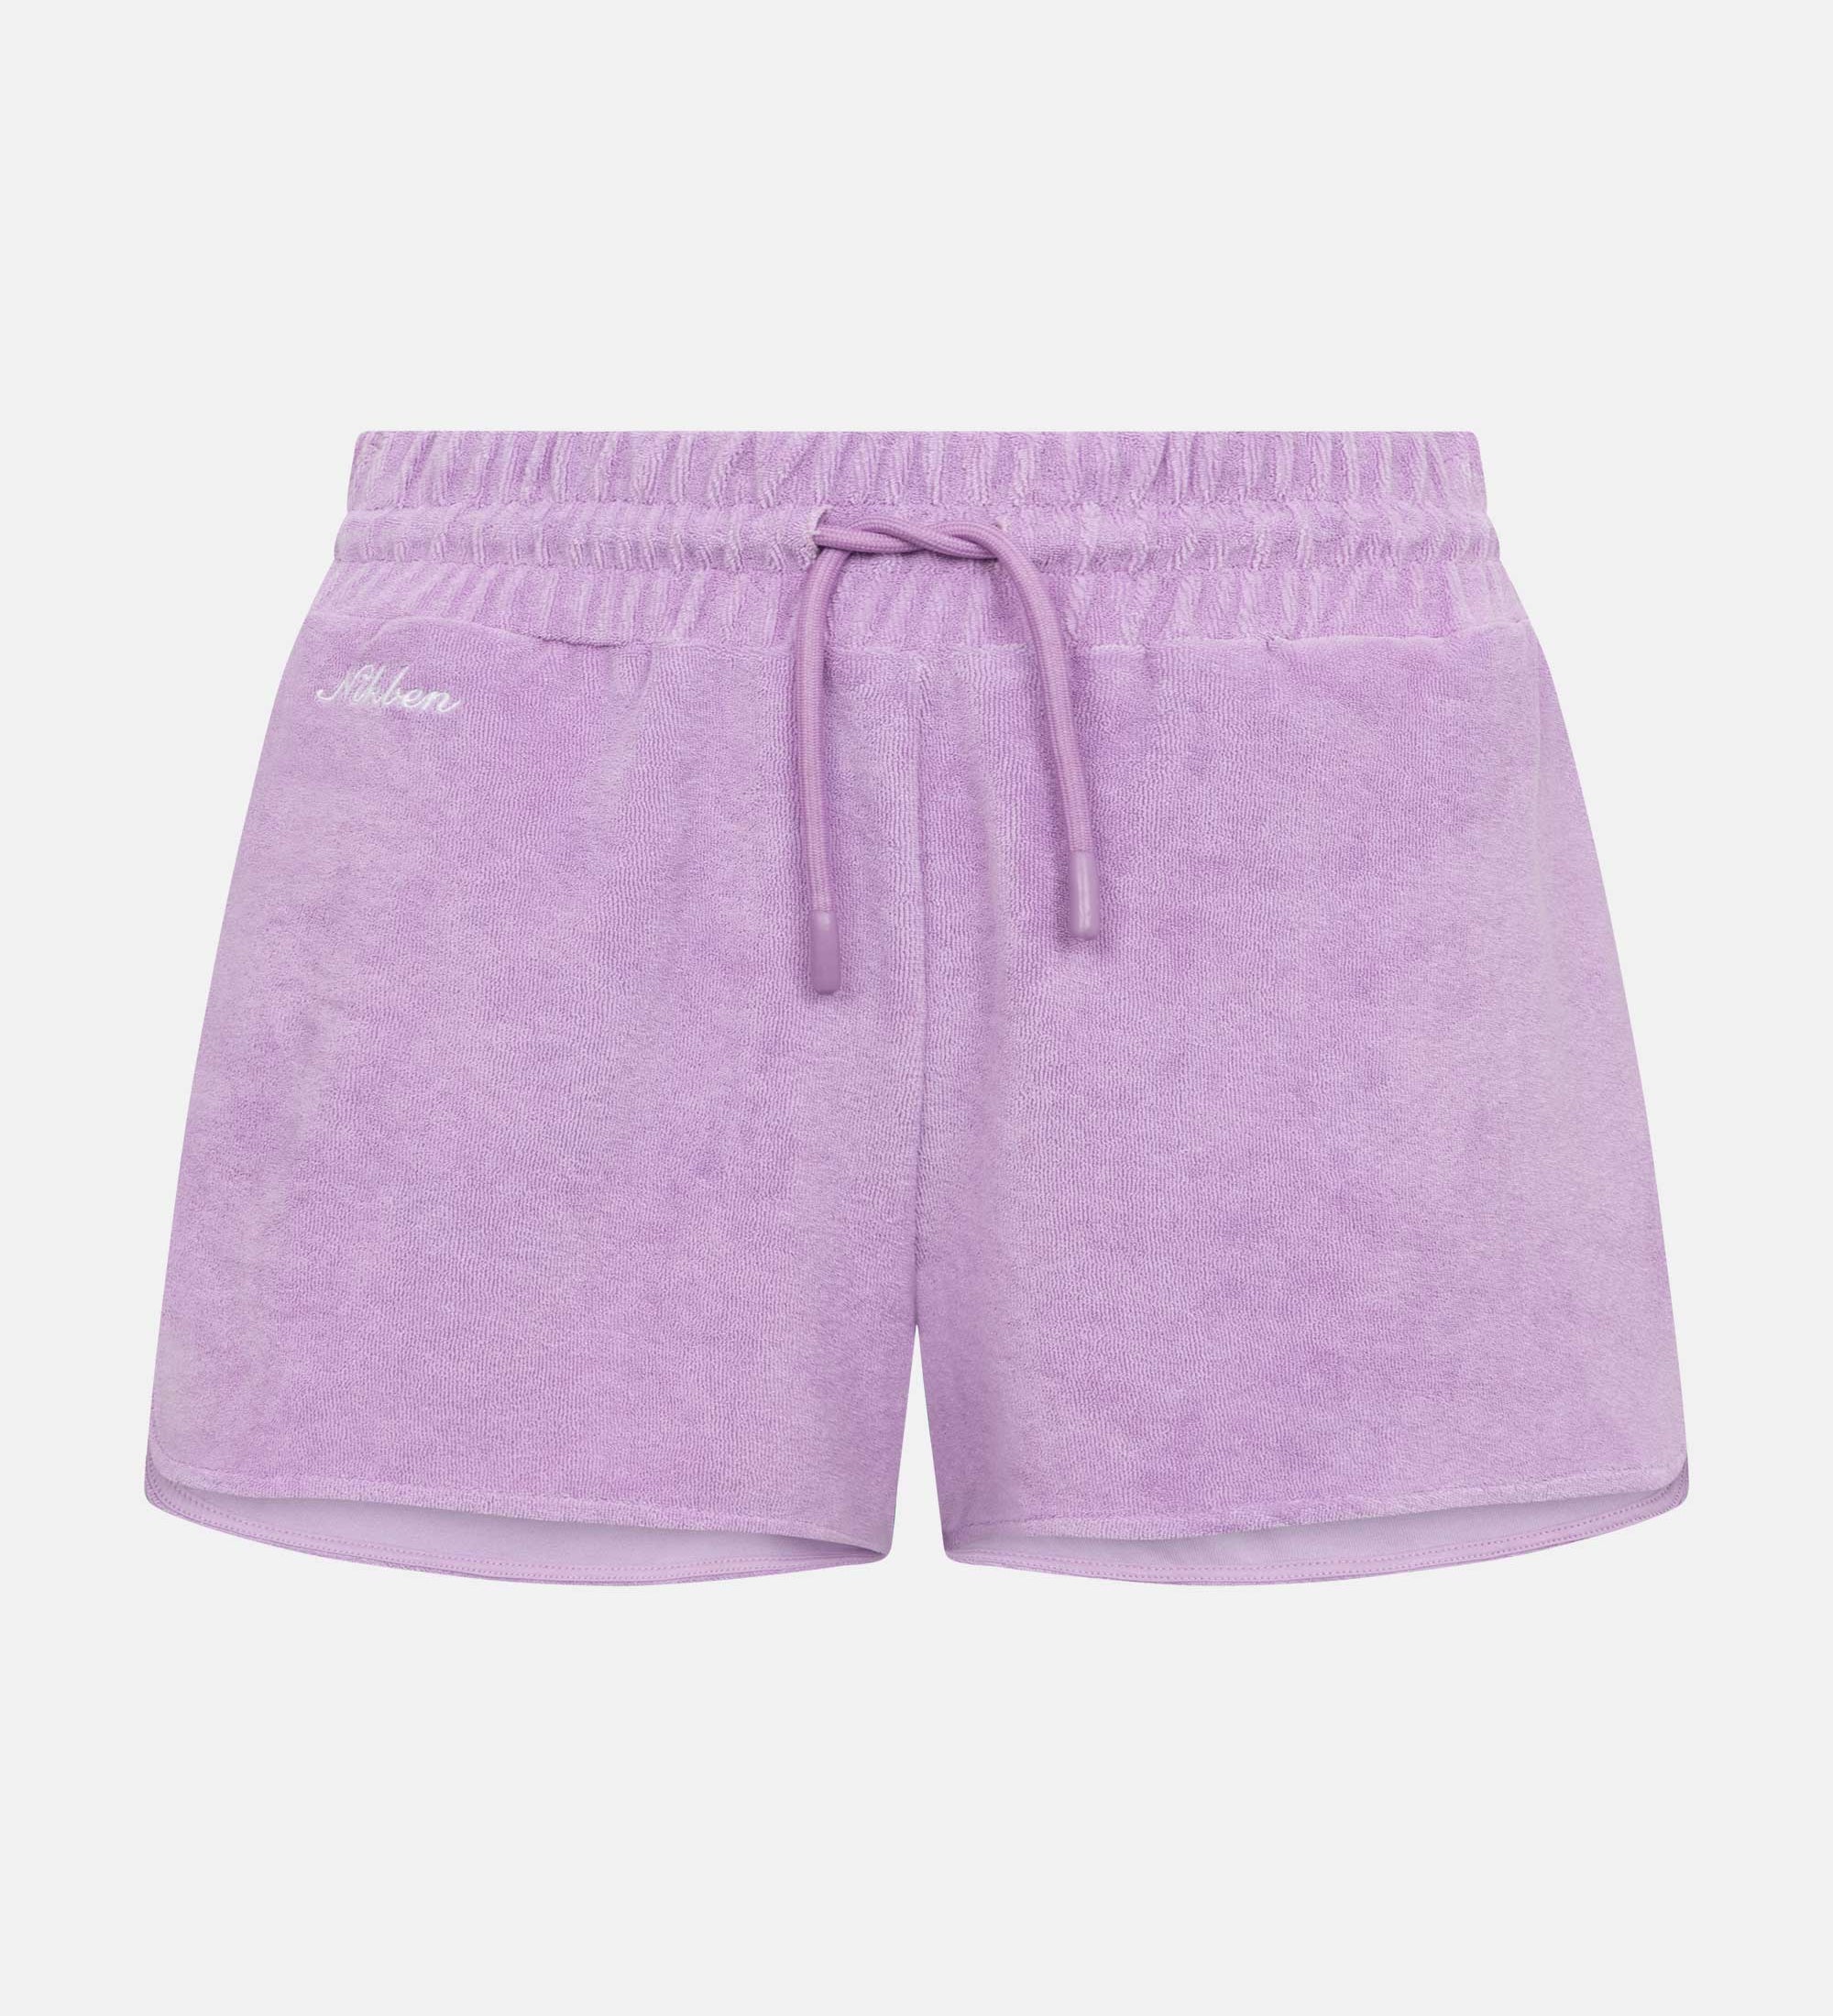 Purple low cut shorts in terry toweling fabric with drawstring and two side pockets.